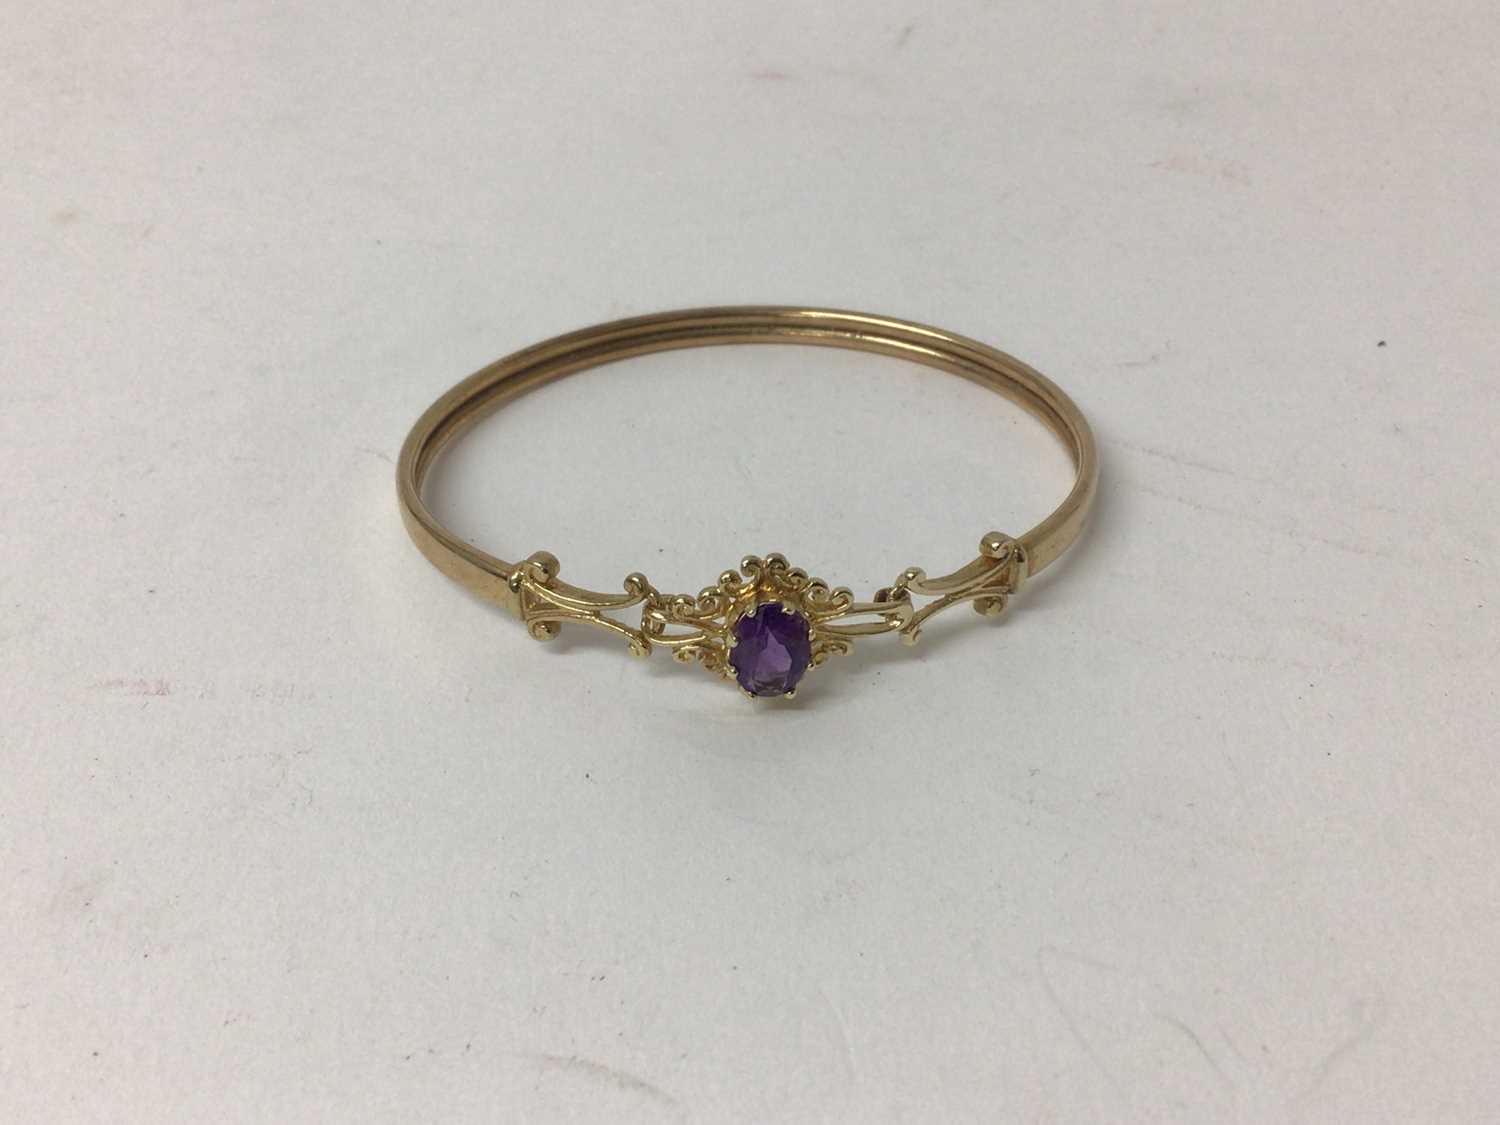 9ct gold and amethyst bangle with an oval mixed cut amethyst and gold scroll shoulders.